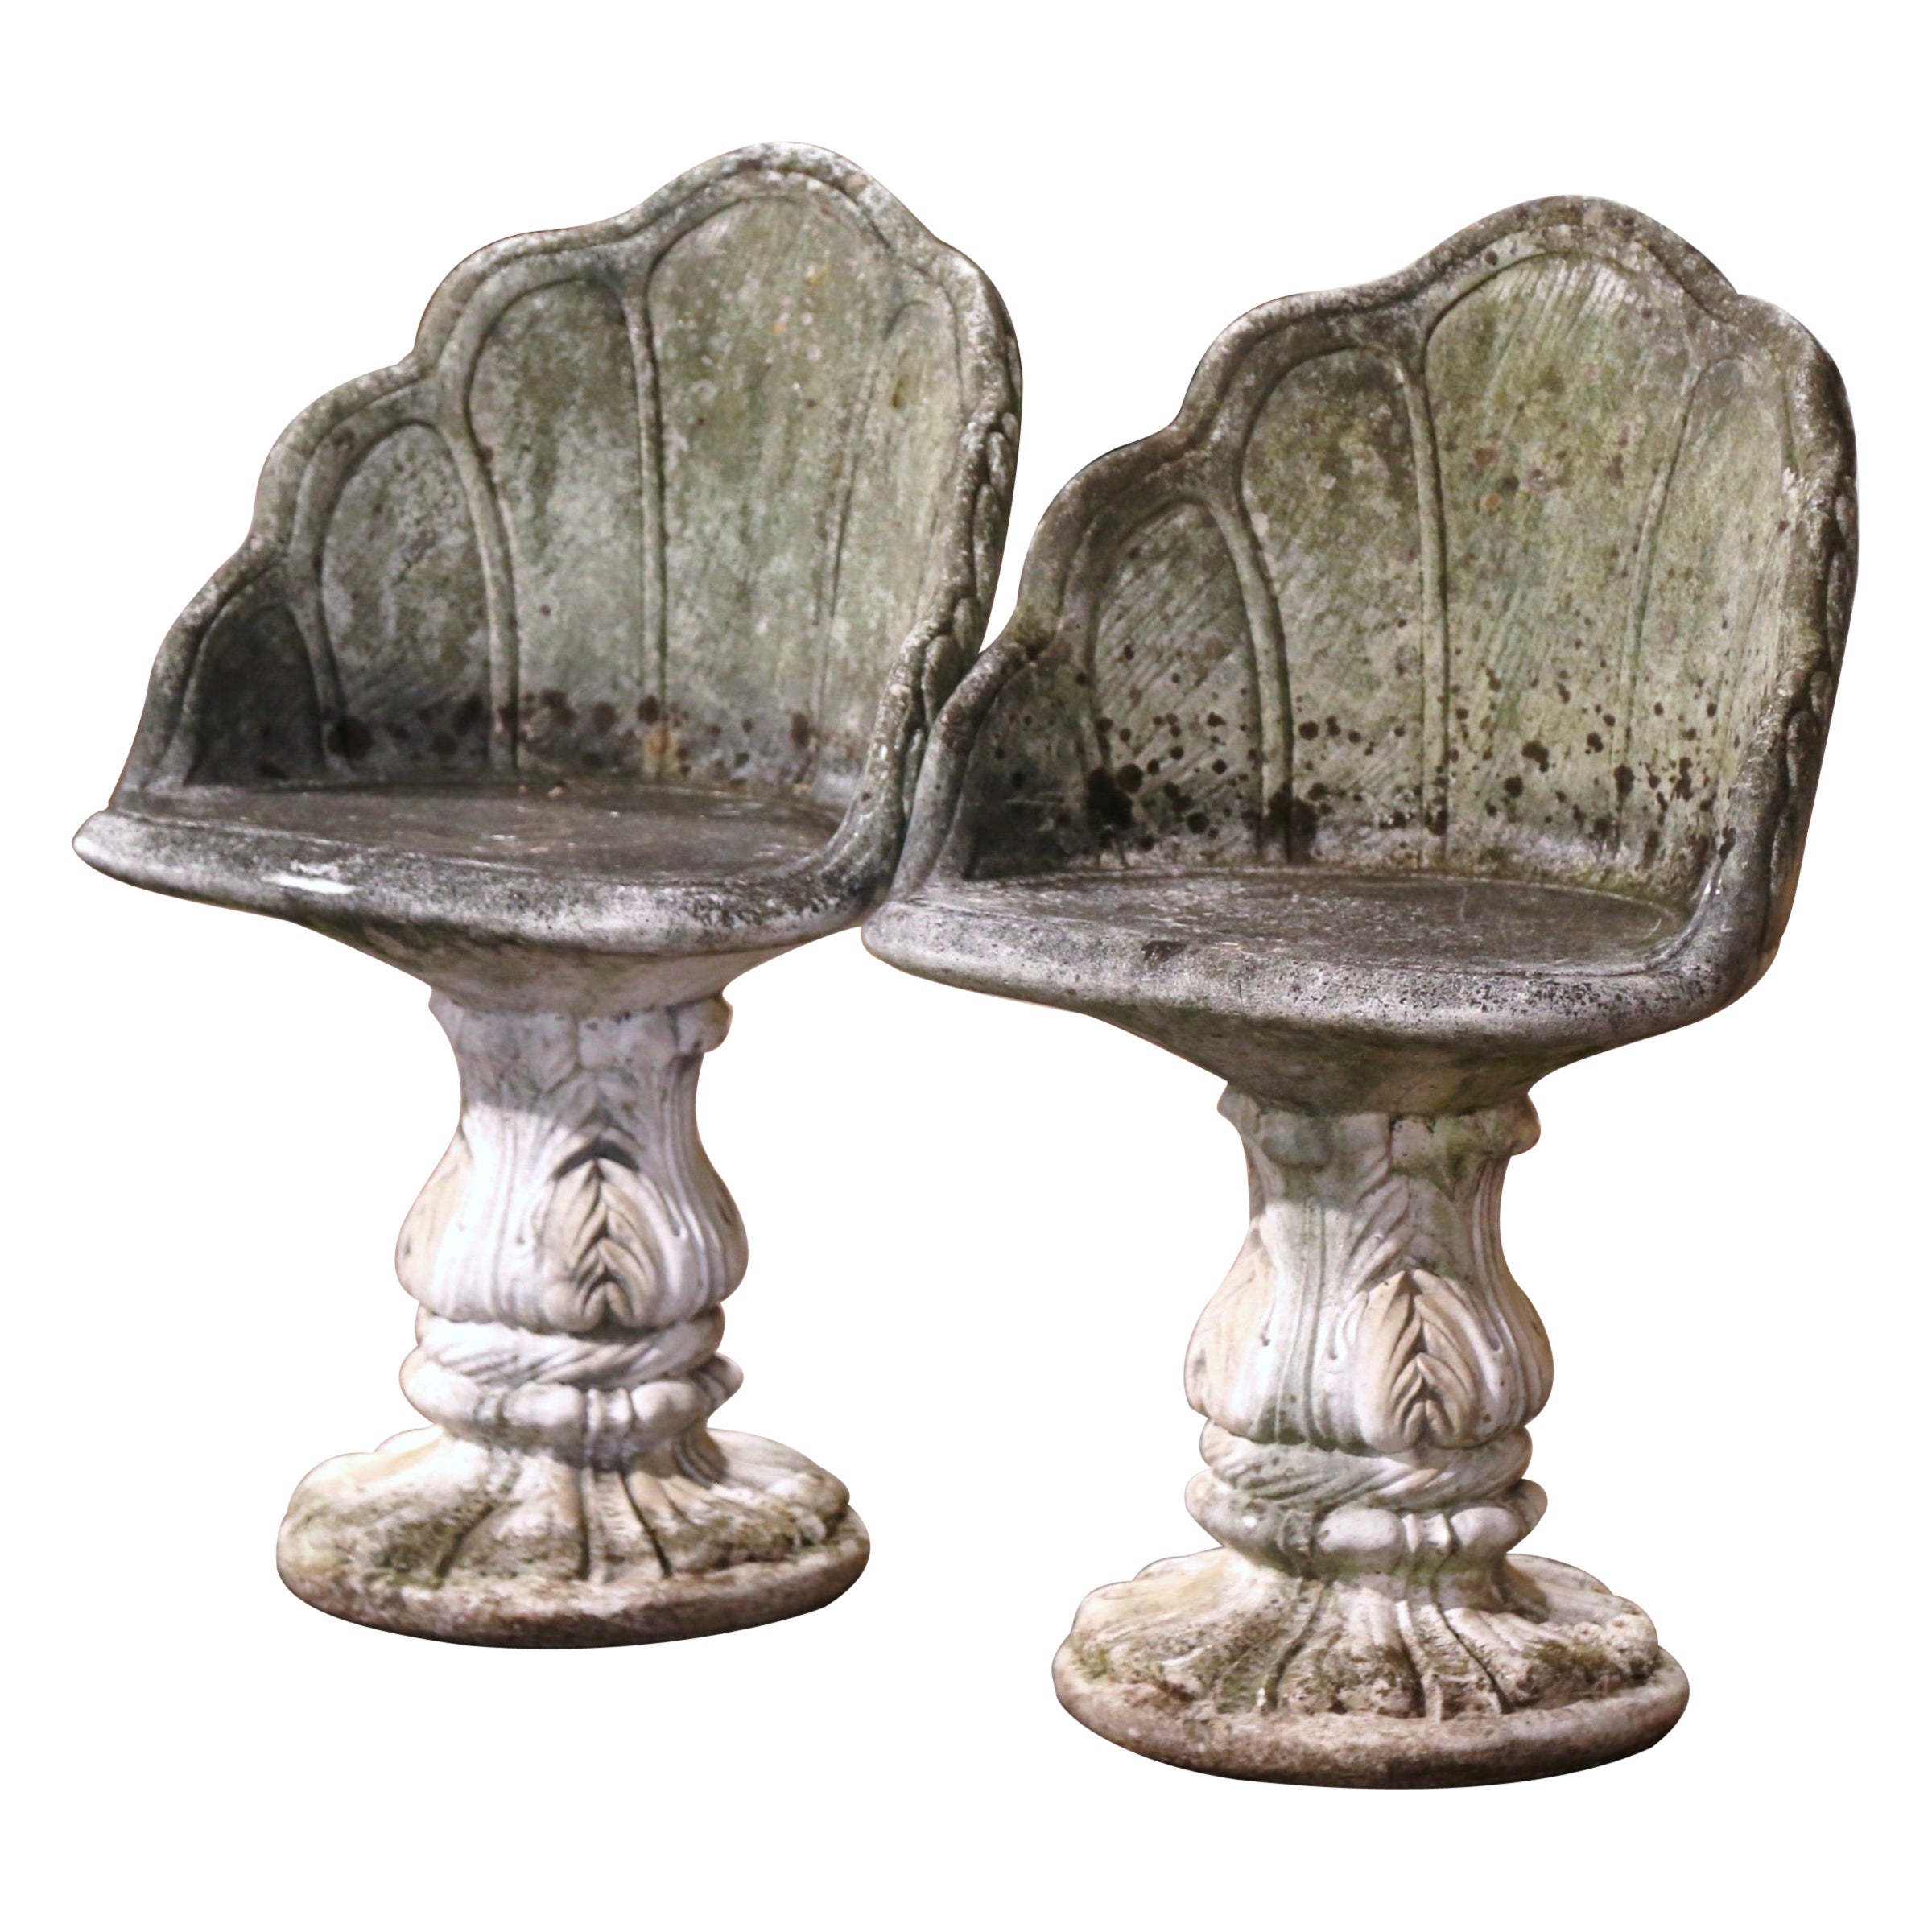 Pair of Mid Century Carved Stone Garden Chairs with Seashell Motifs